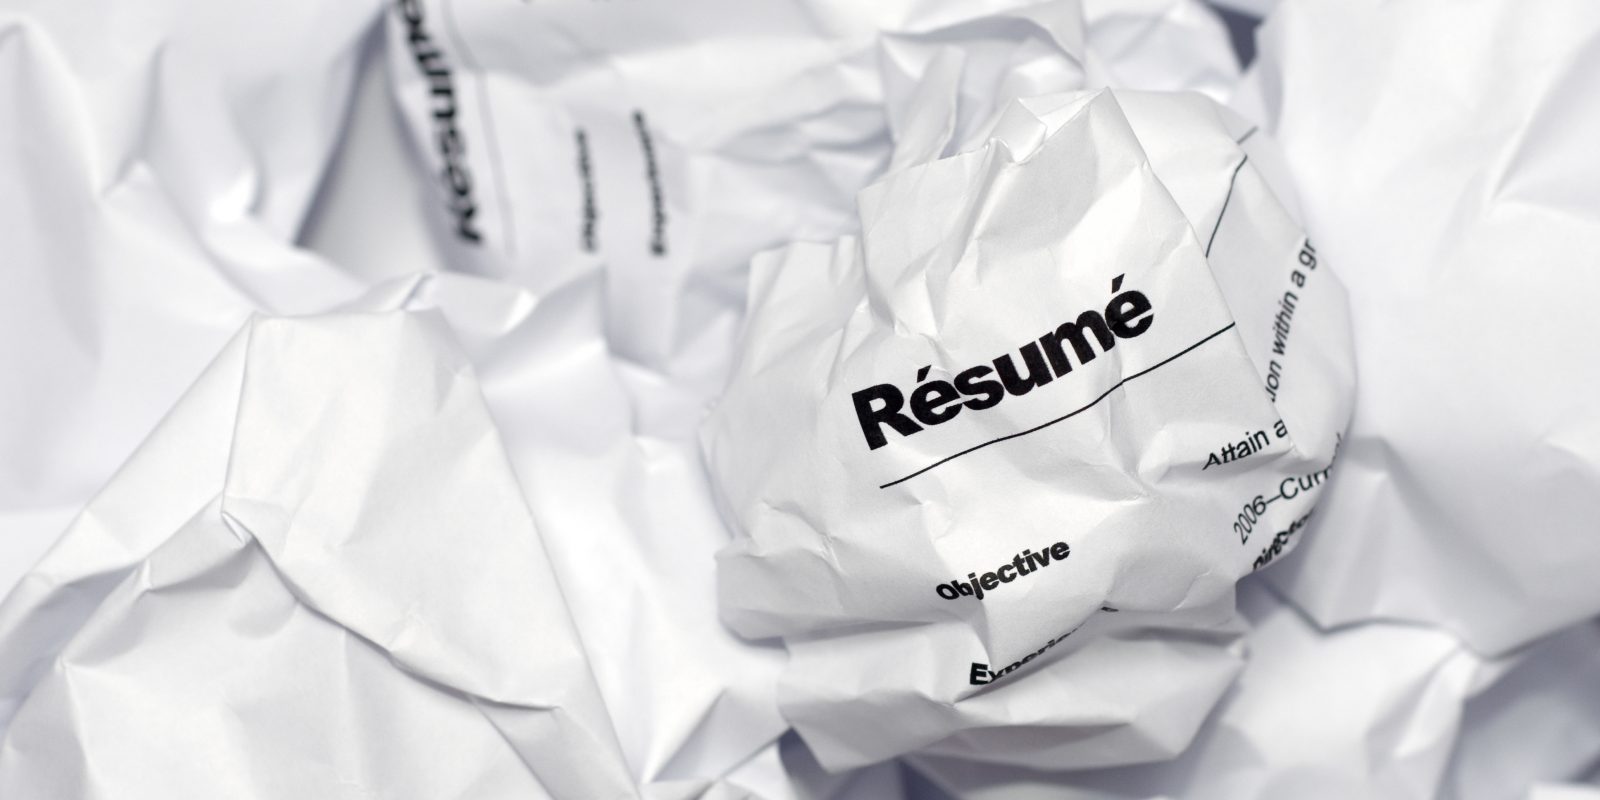 Stop sending your resume to the trash! The most common resume mistakes to avoid if you want to land an interview